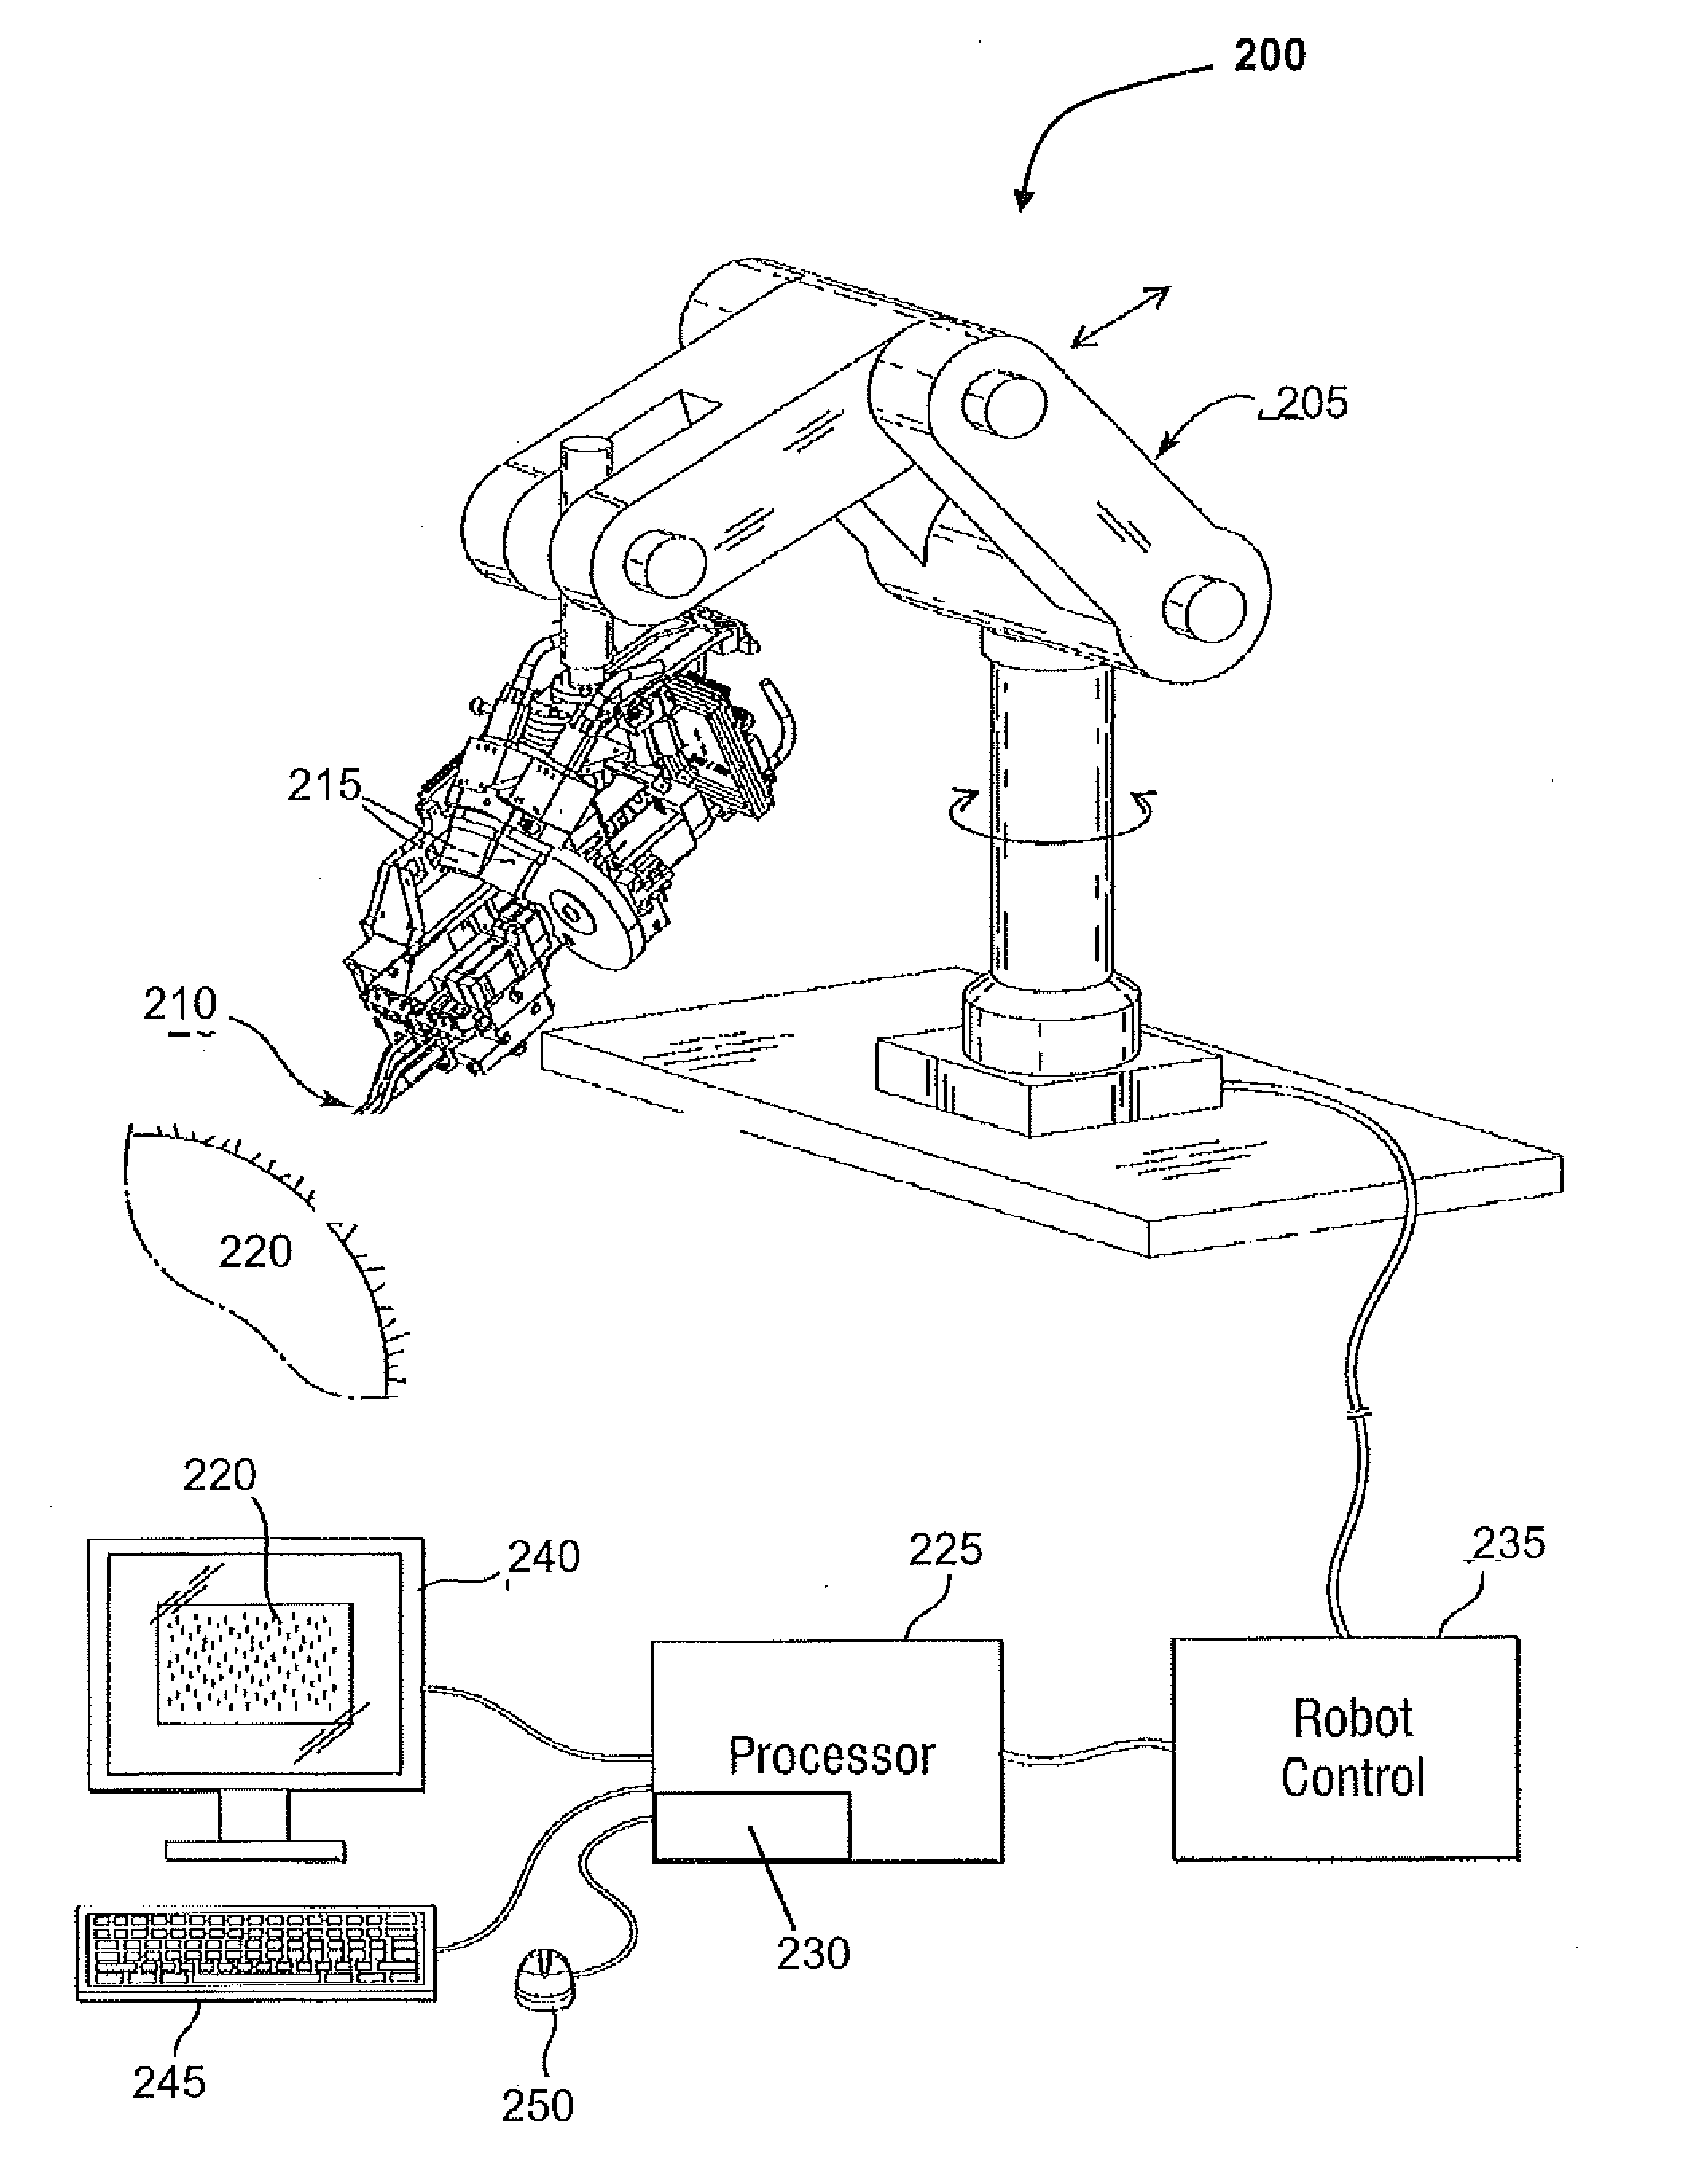 Methods and systems for directing movement of a tool in hair transplantation procedures